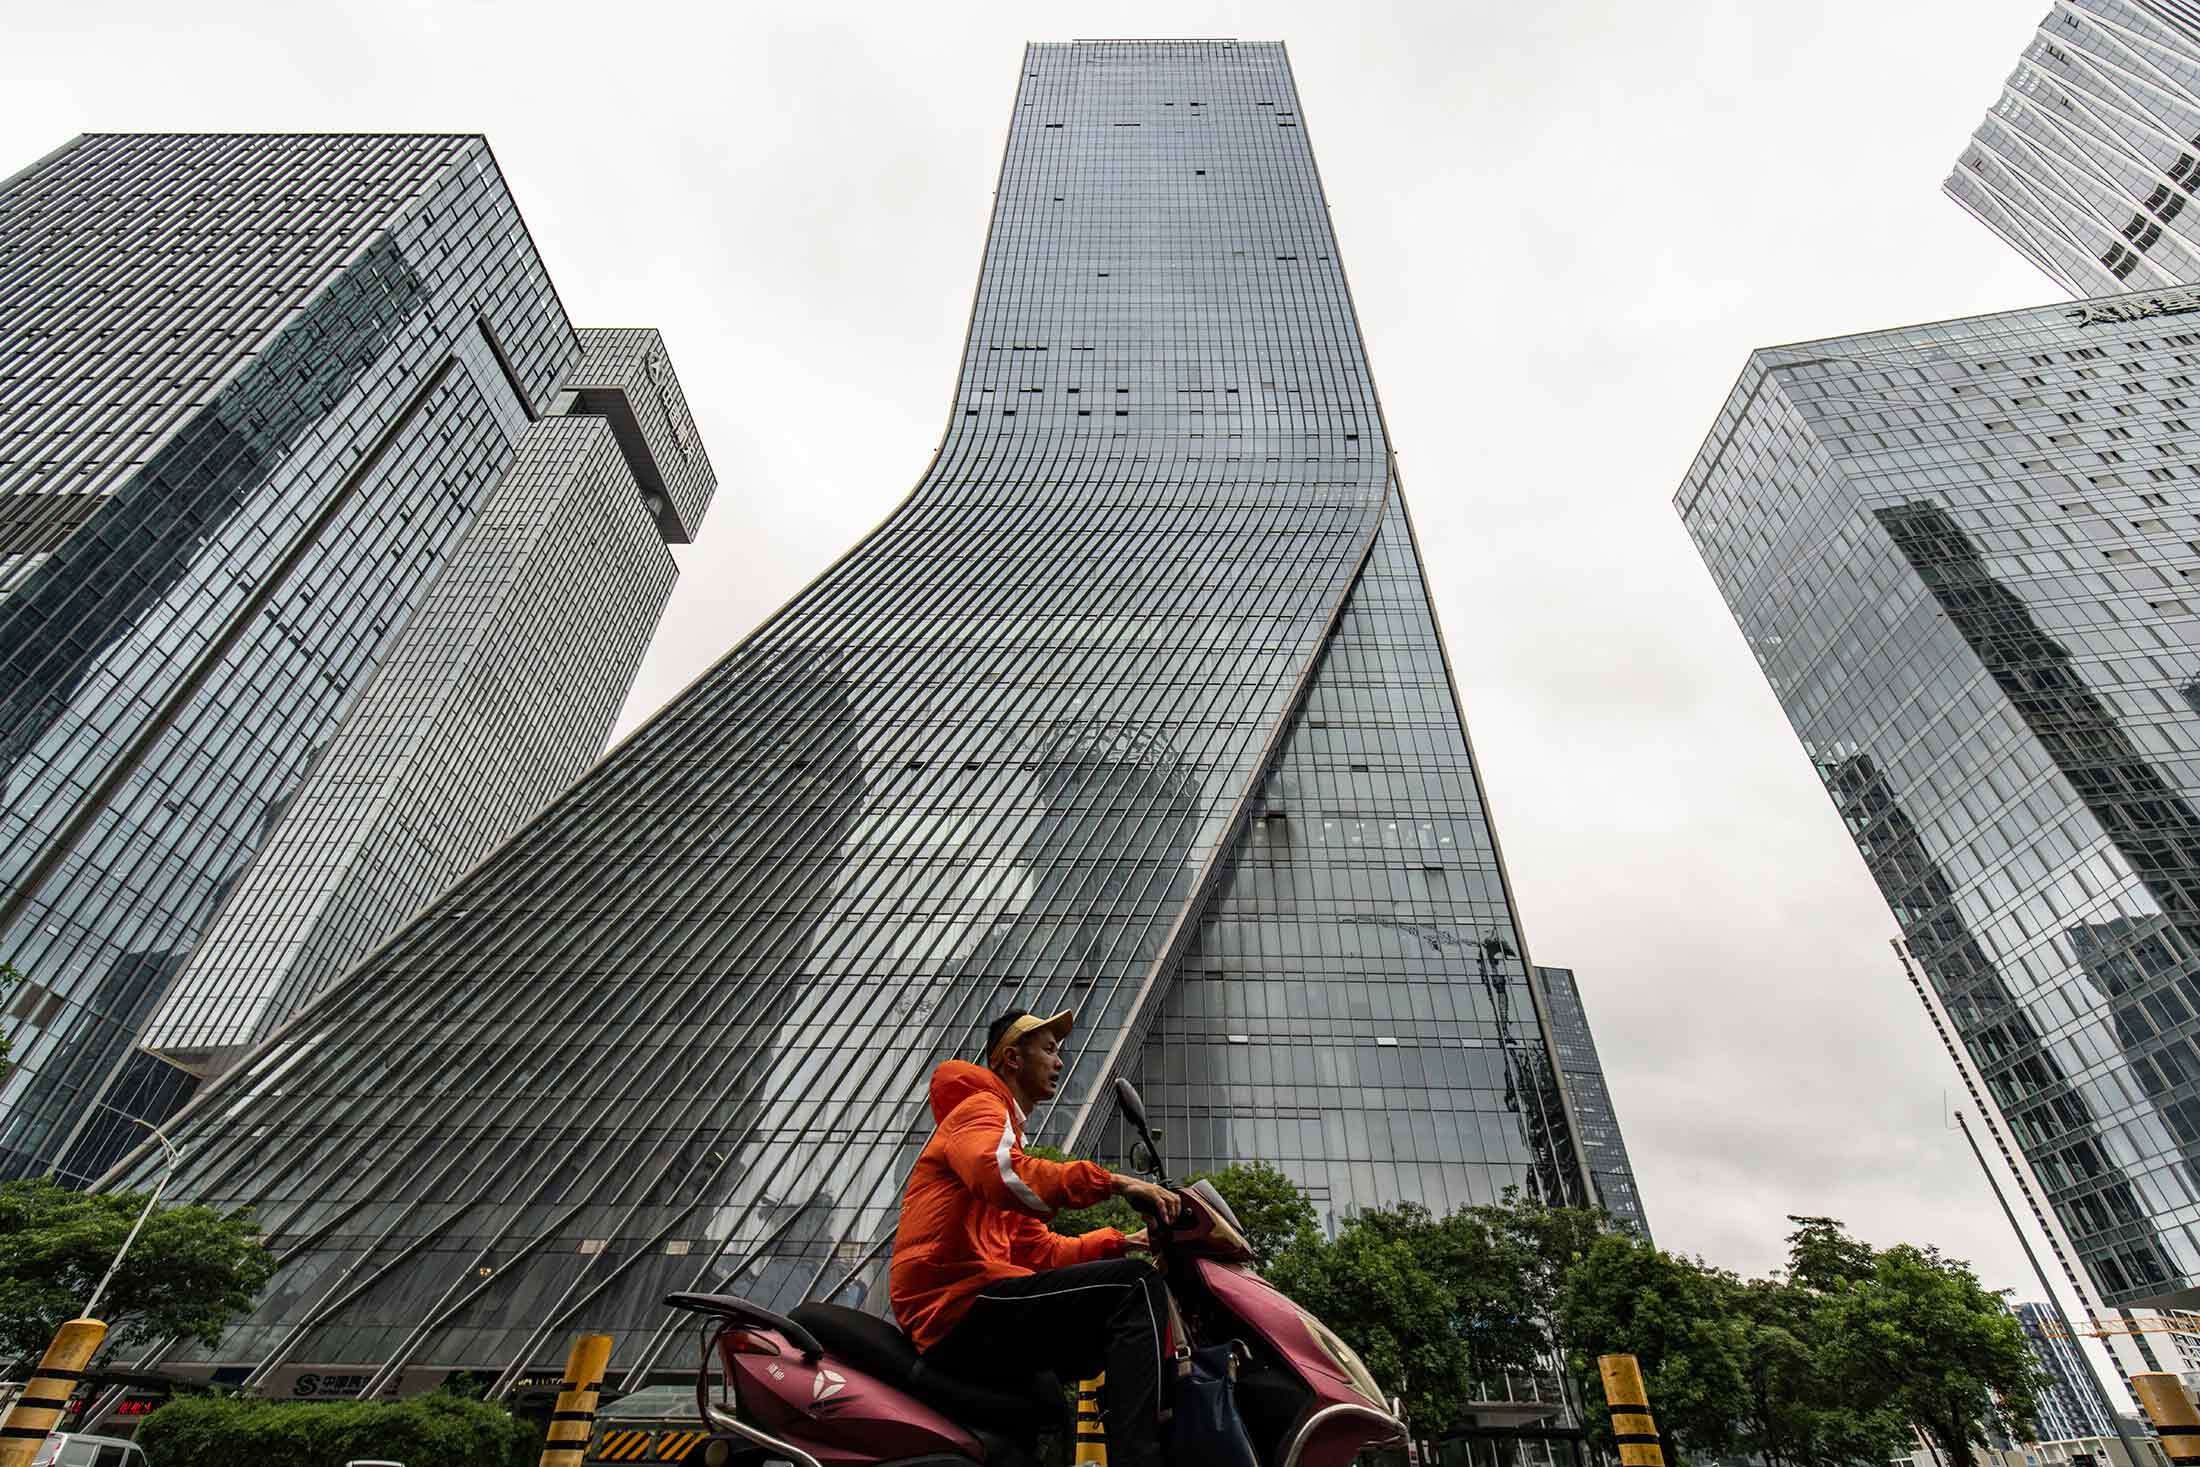 A man in Shenzhen rides past the tower that used to be Evergrande’s headquarters.